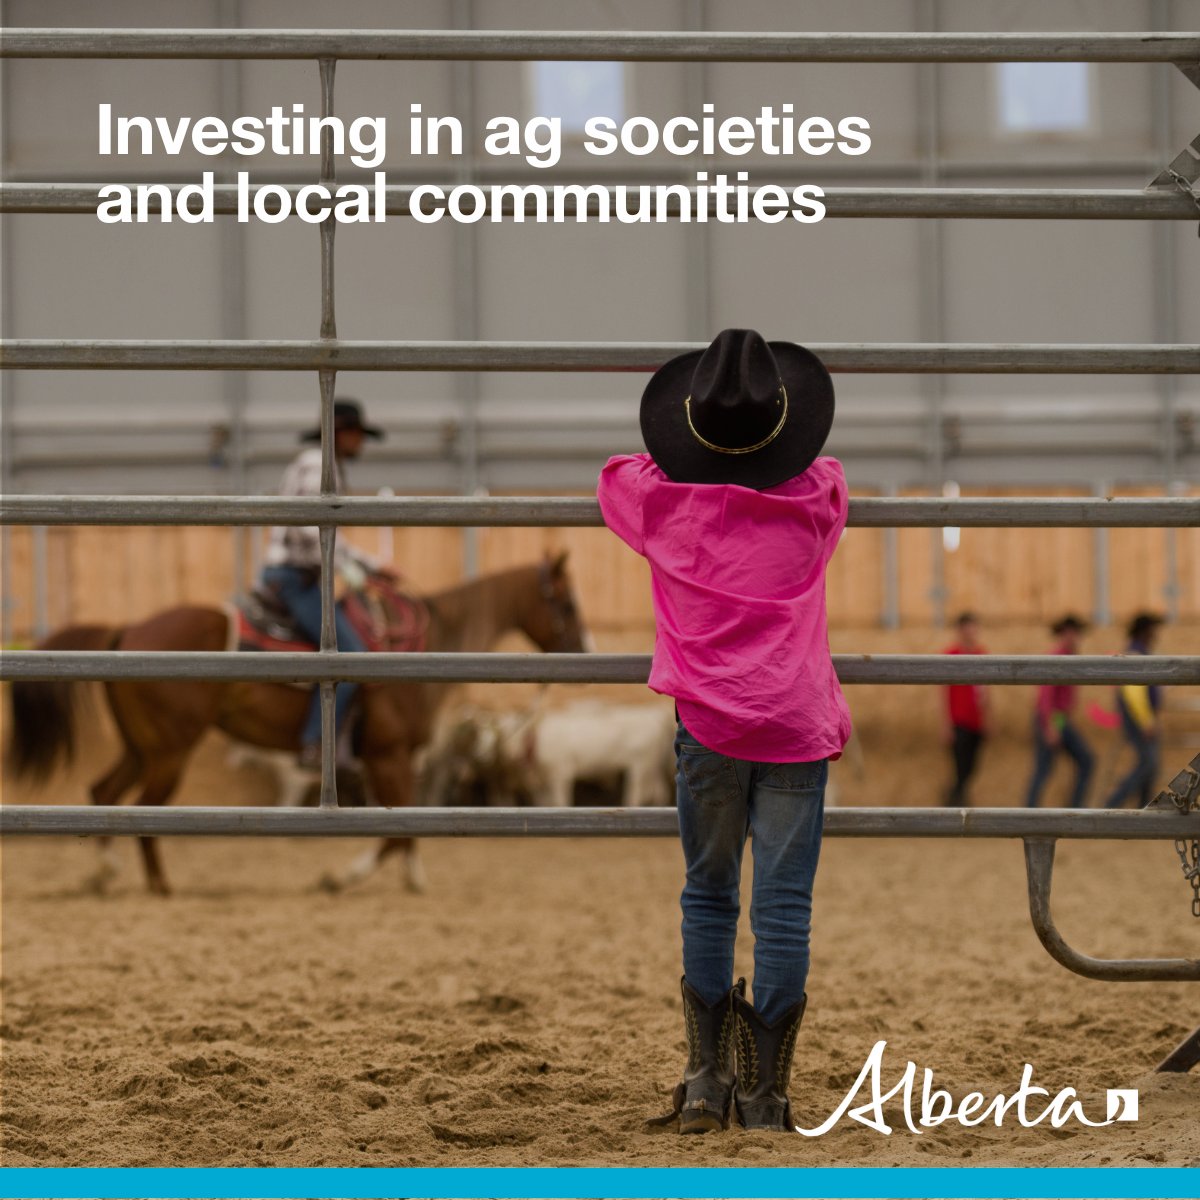 #ICYMI: The Agricultural Societies Infrastructure Revitalization Program is now available to help ag societies across the province upgrade aging facilities that host events like rural fairs, farmers’ markets and rodeos. #abag Learn more: alberta.ca/release.cfm?xI…